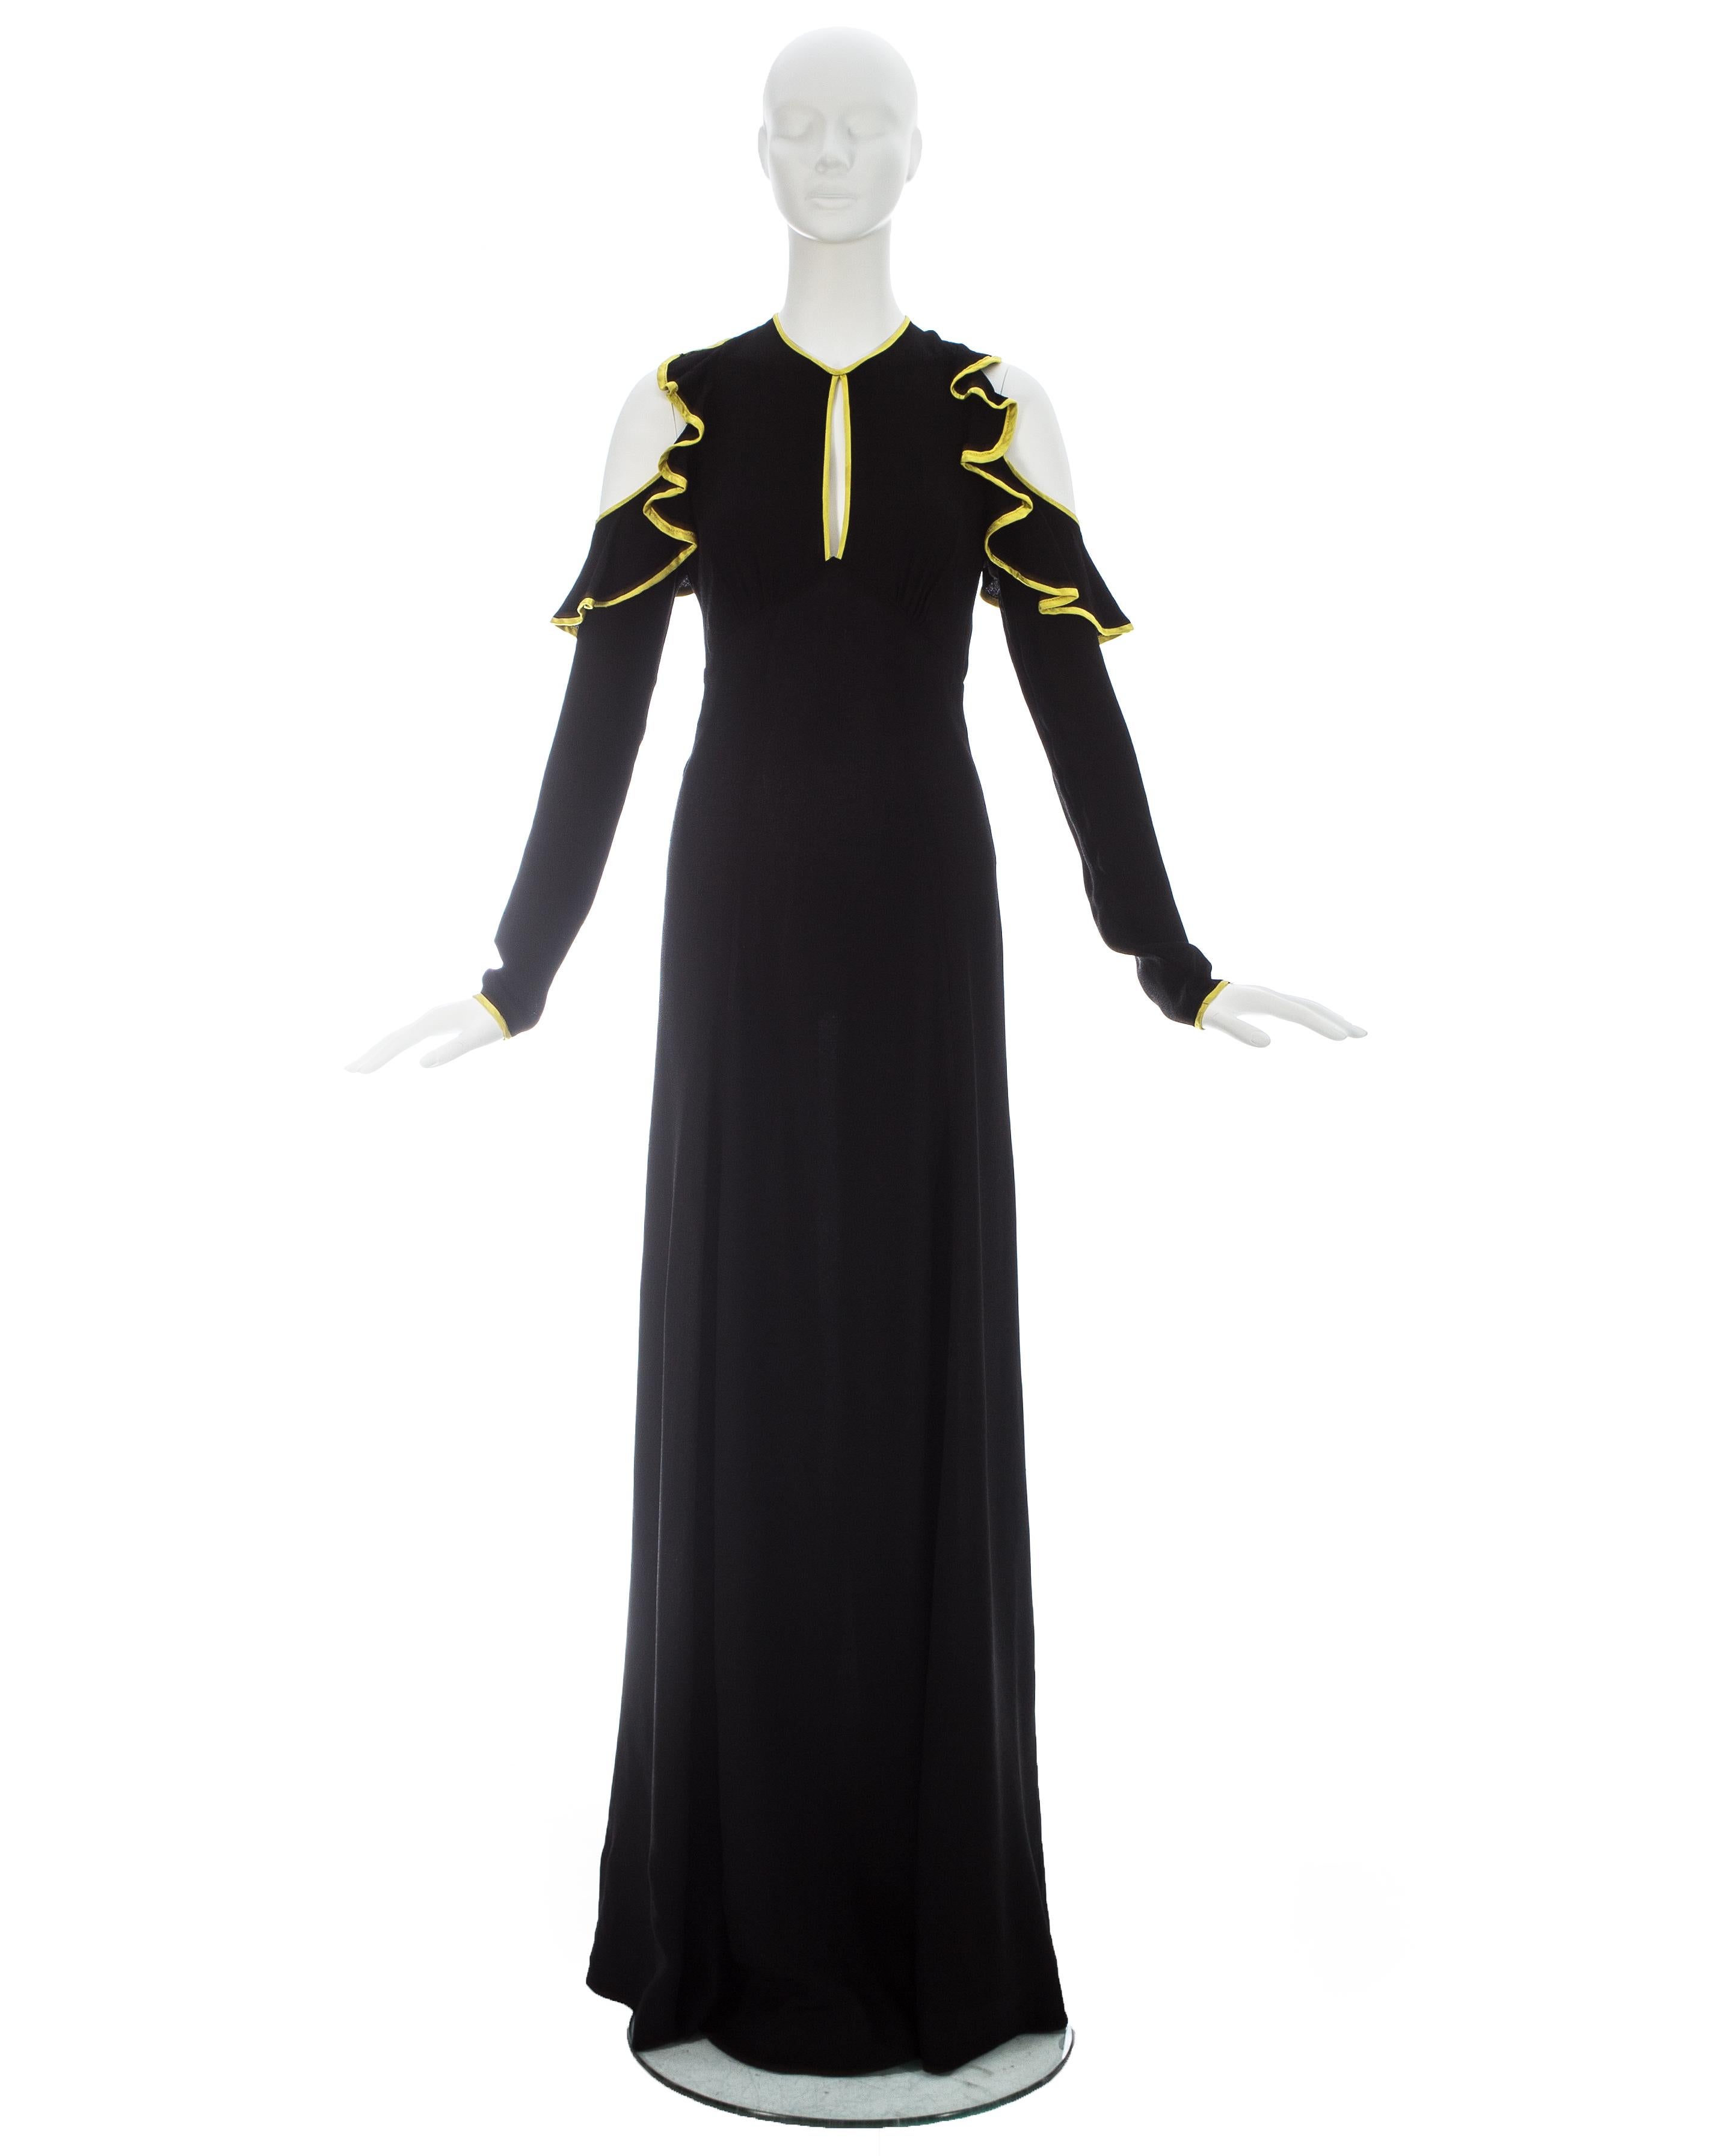 Black moss crepe 'Judy' dress edge in yellow satin with flounced cold shoulders and peek-a-boo cleavage

ca. 1970